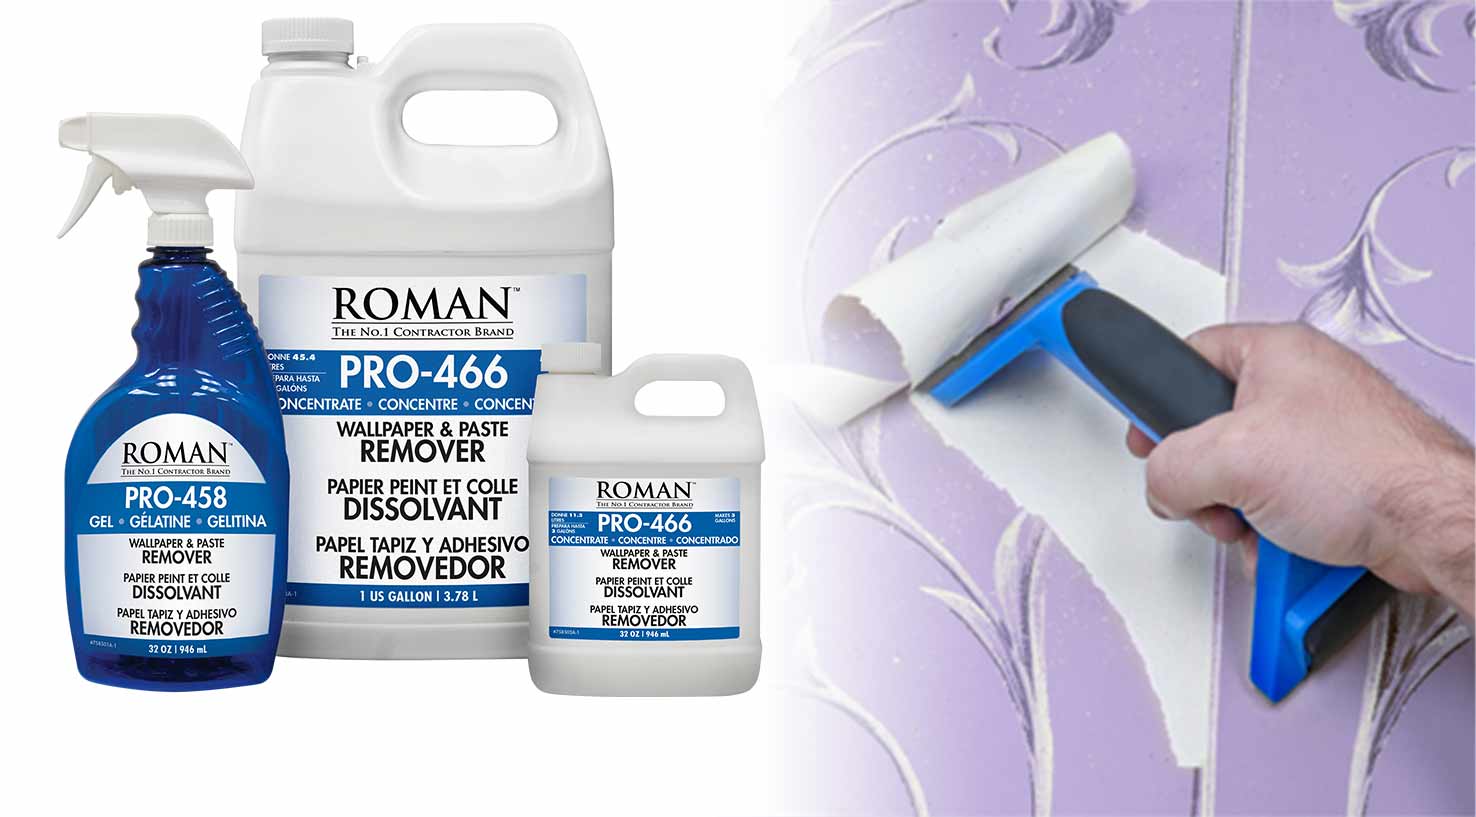 Roman PRO-466 Wallpaper and Paste Remover Concentrate